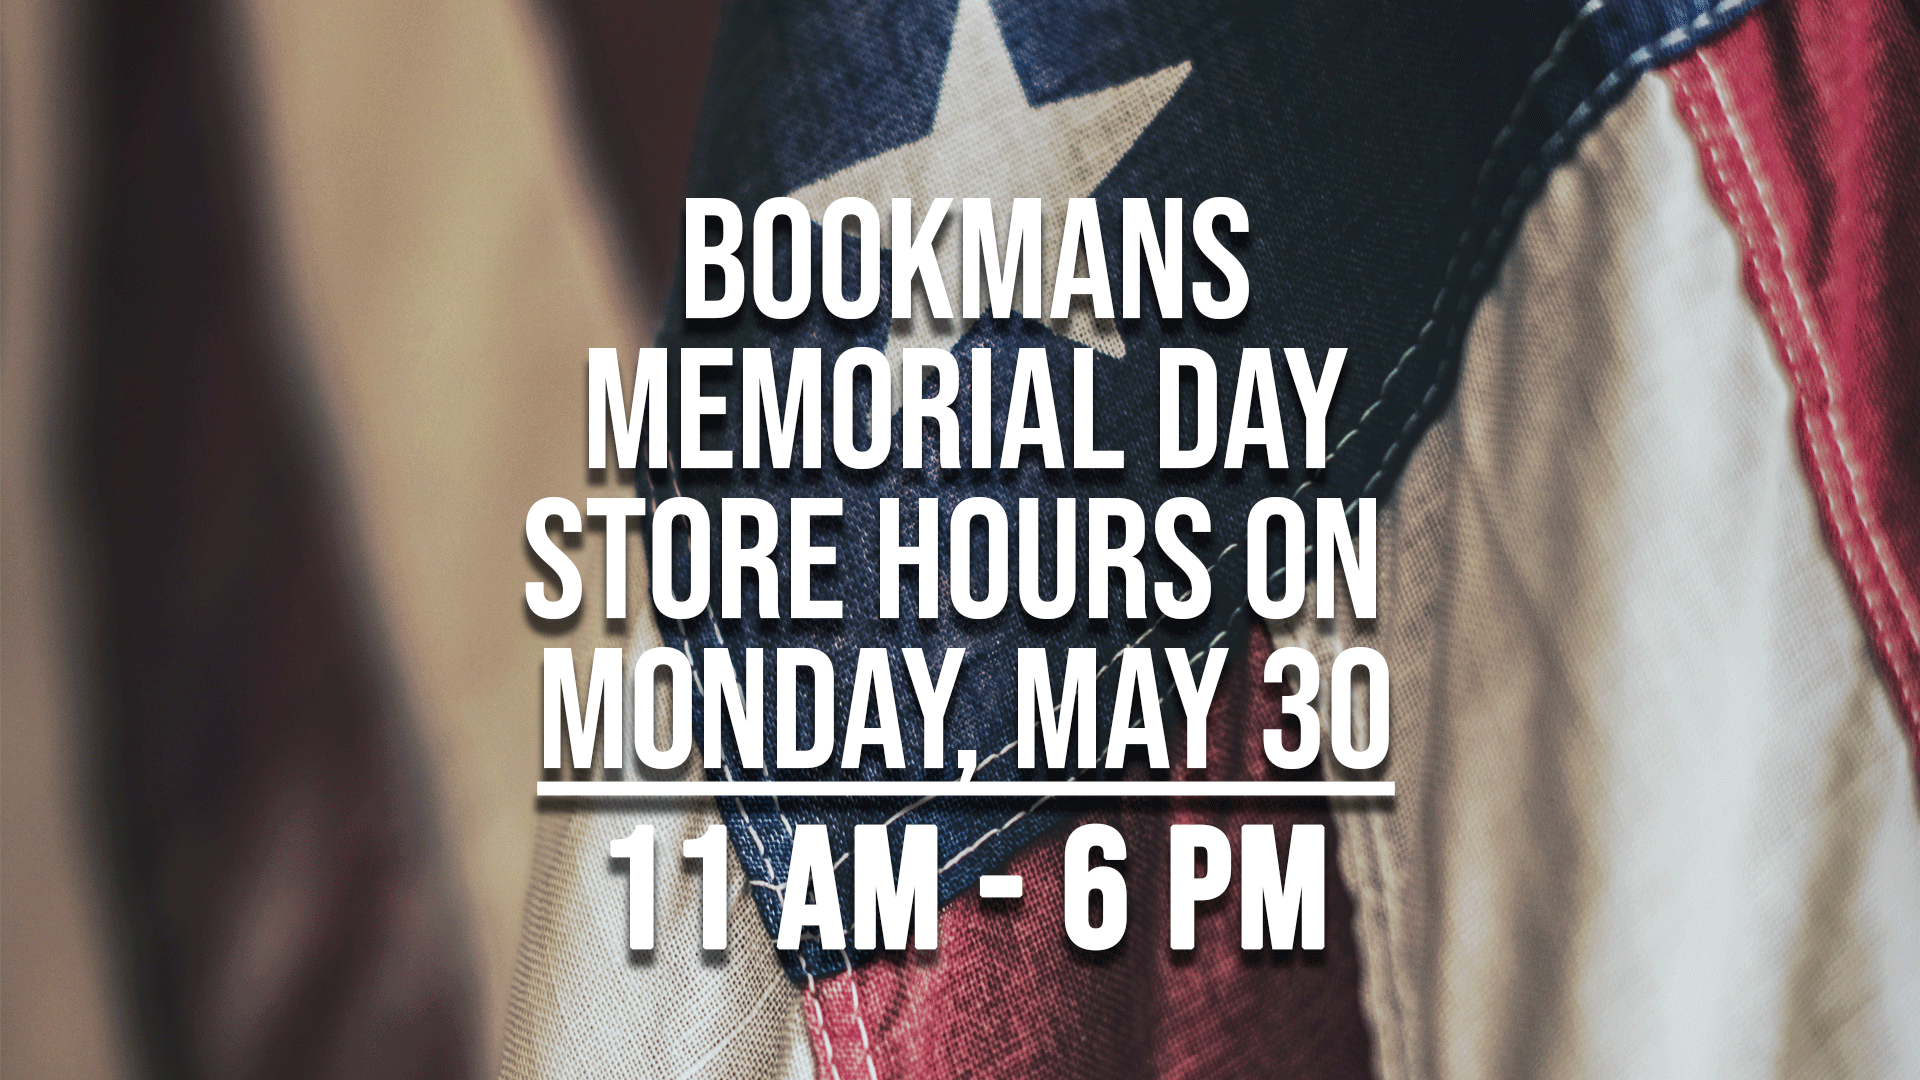 bookmans memorial day hours 11 am to 6 pm